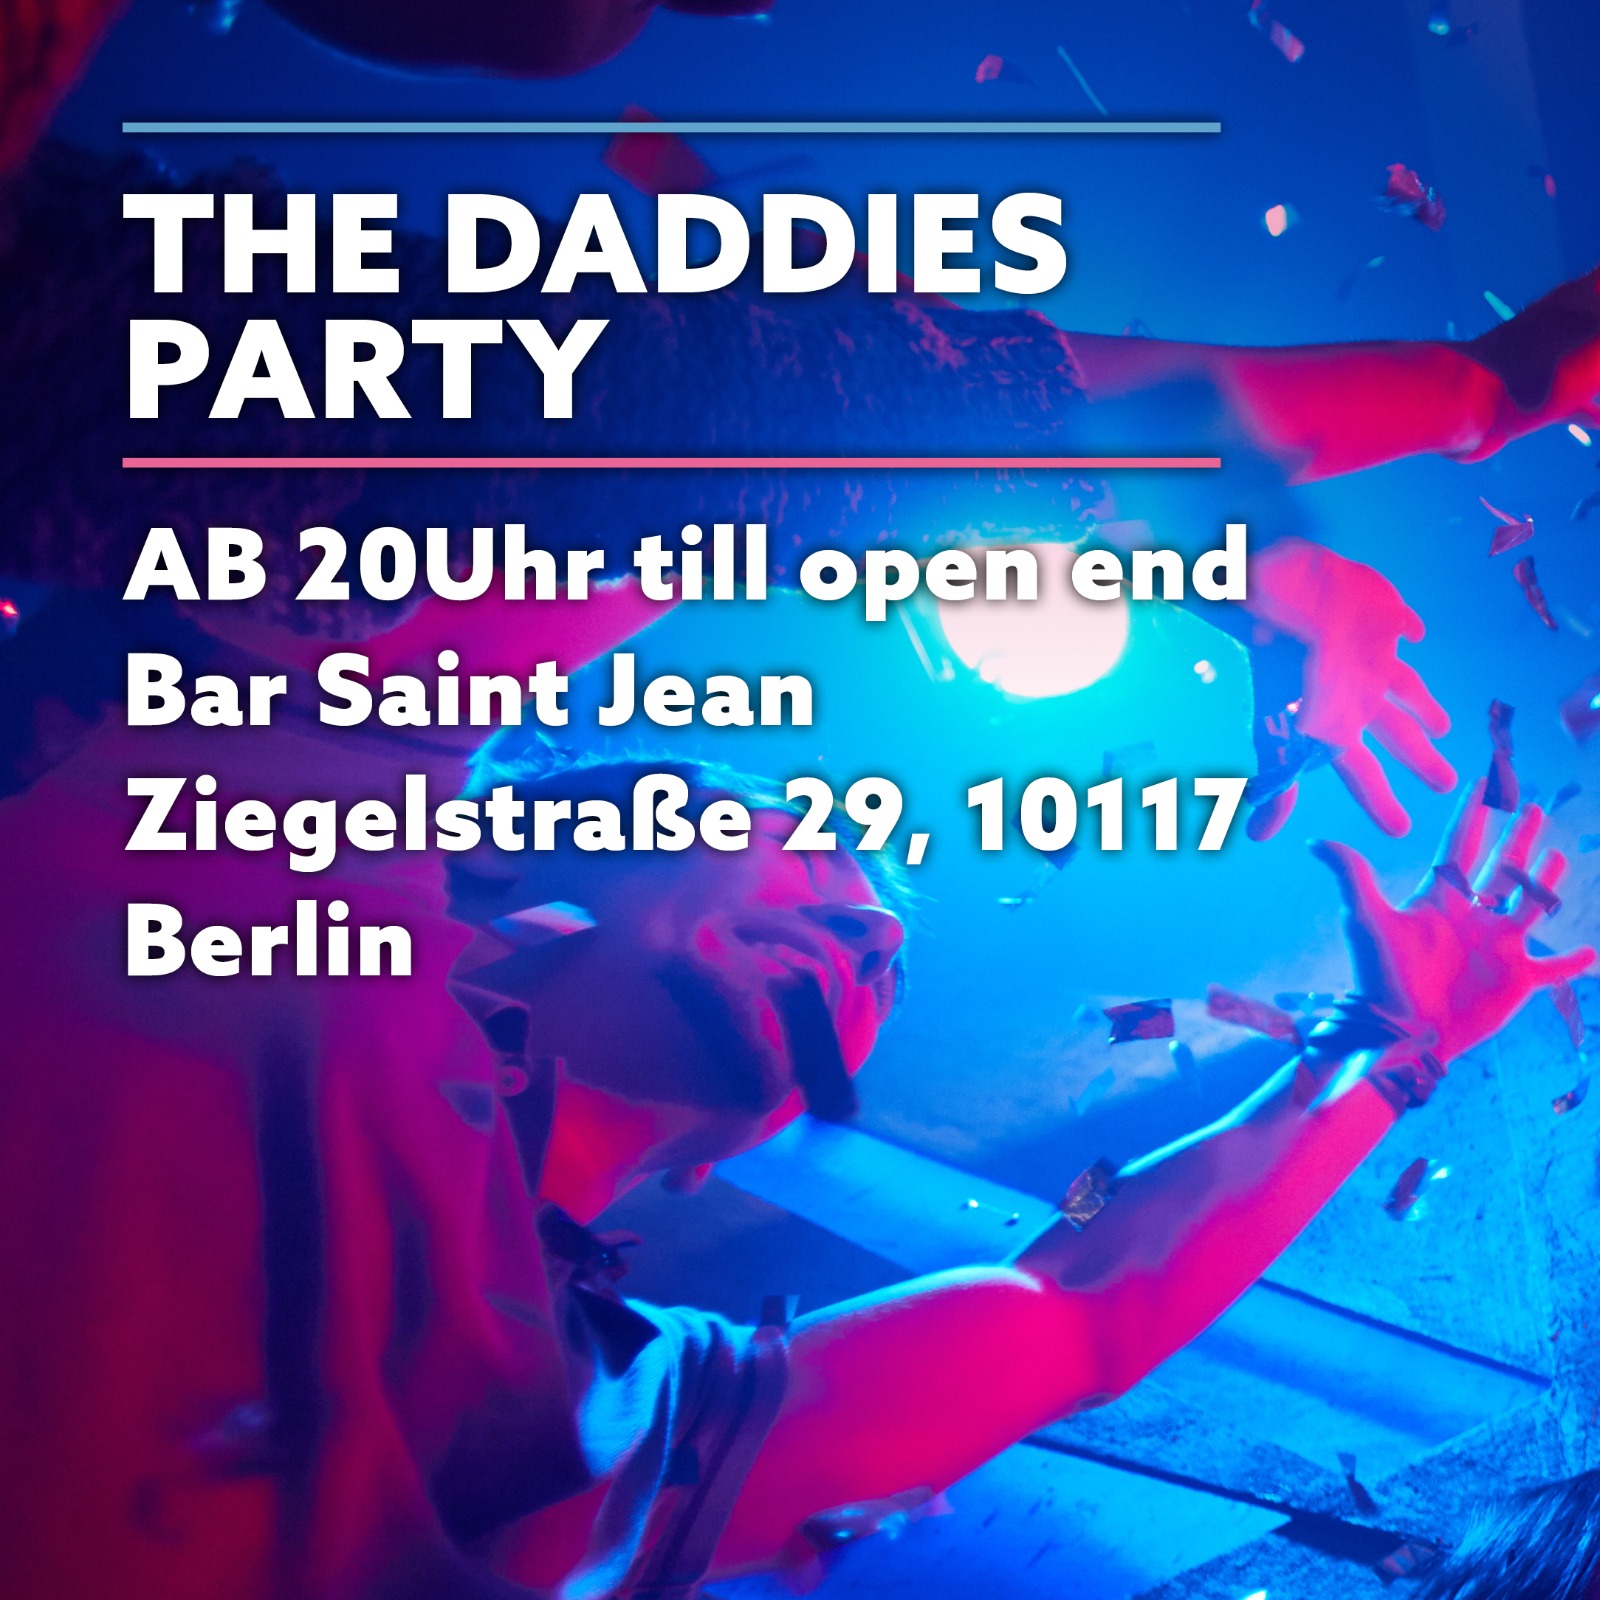 The Daddies Party